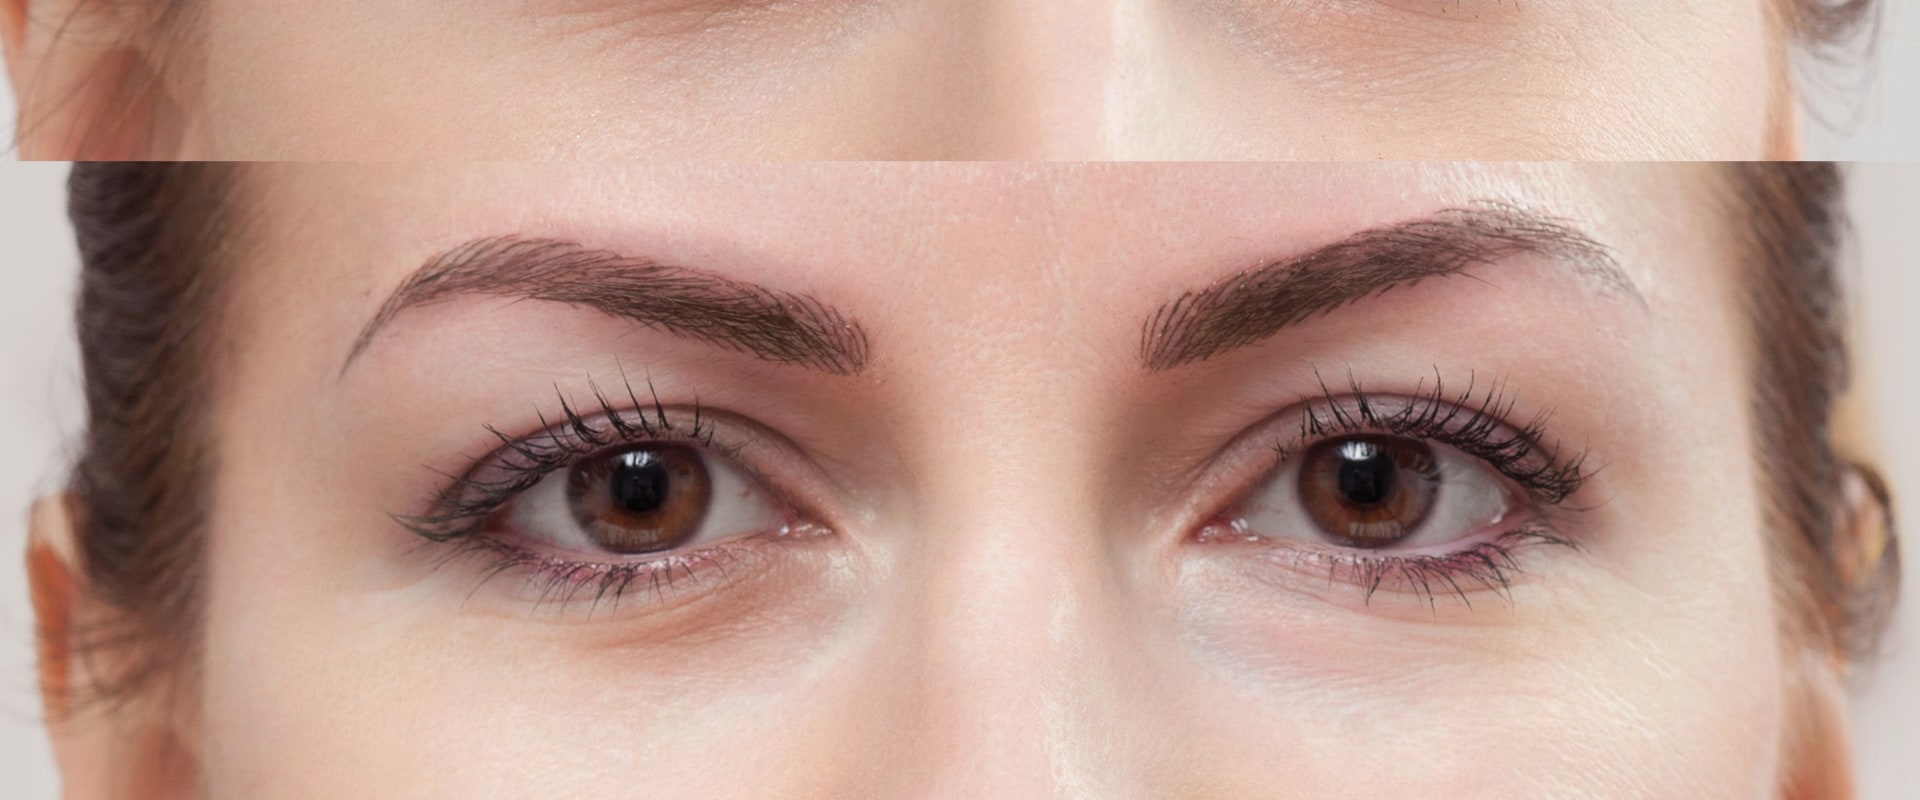 What are microblading eyebrows?